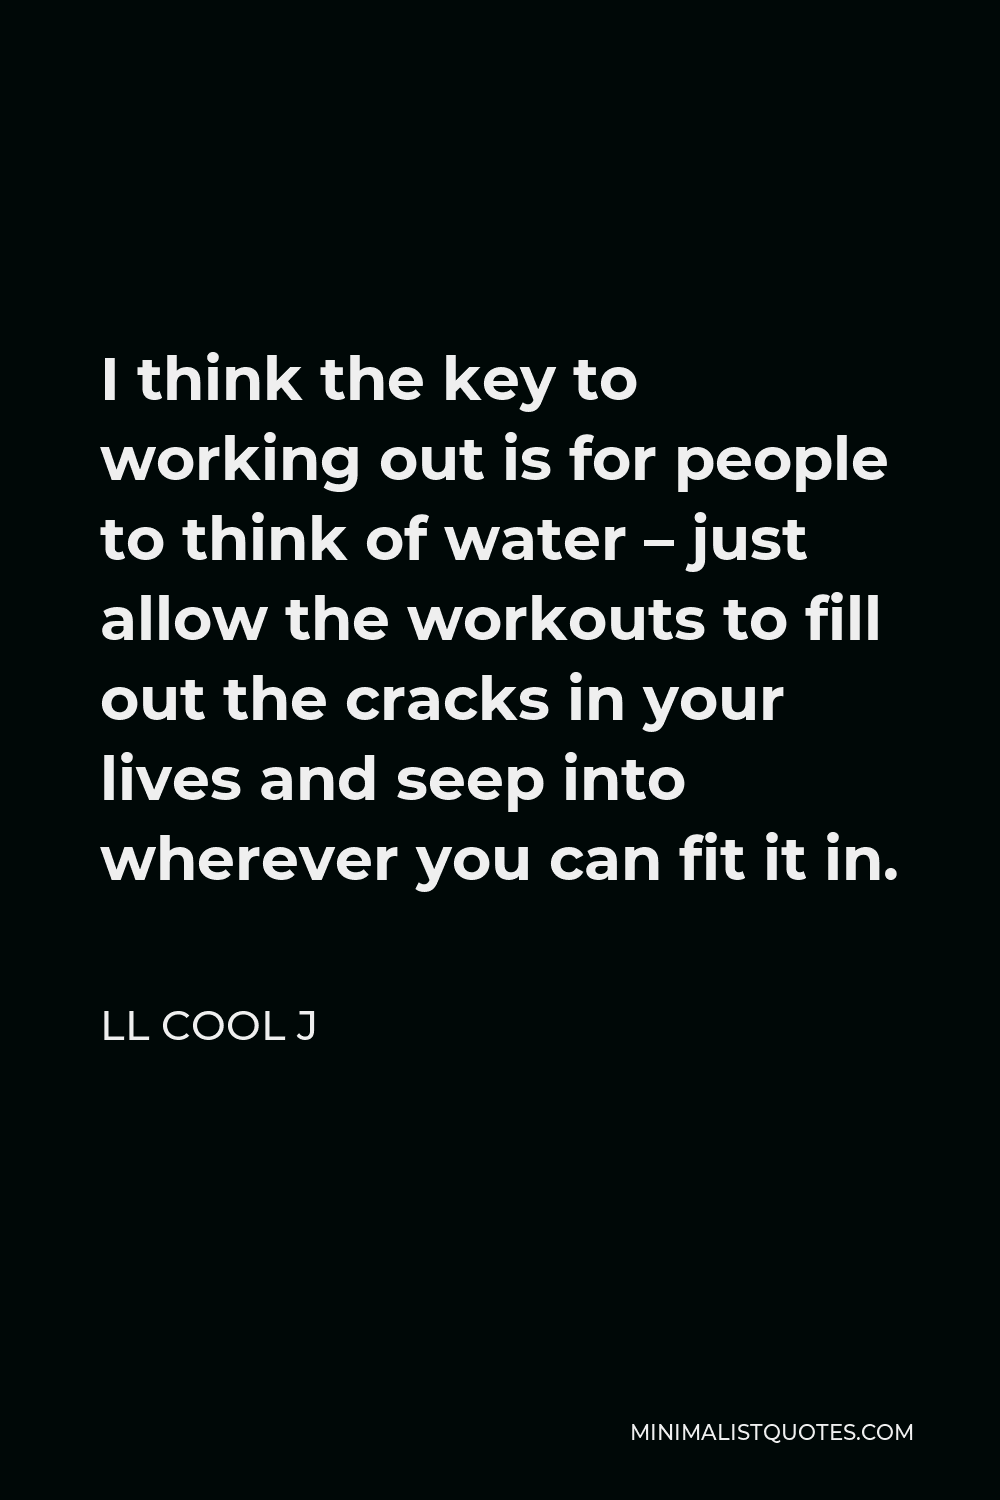 LL Cool J Quote - I think the key to working out is for people to think of water – just allow the workouts to fill out the cracks in your lives and seep into wherever you can fit it in.